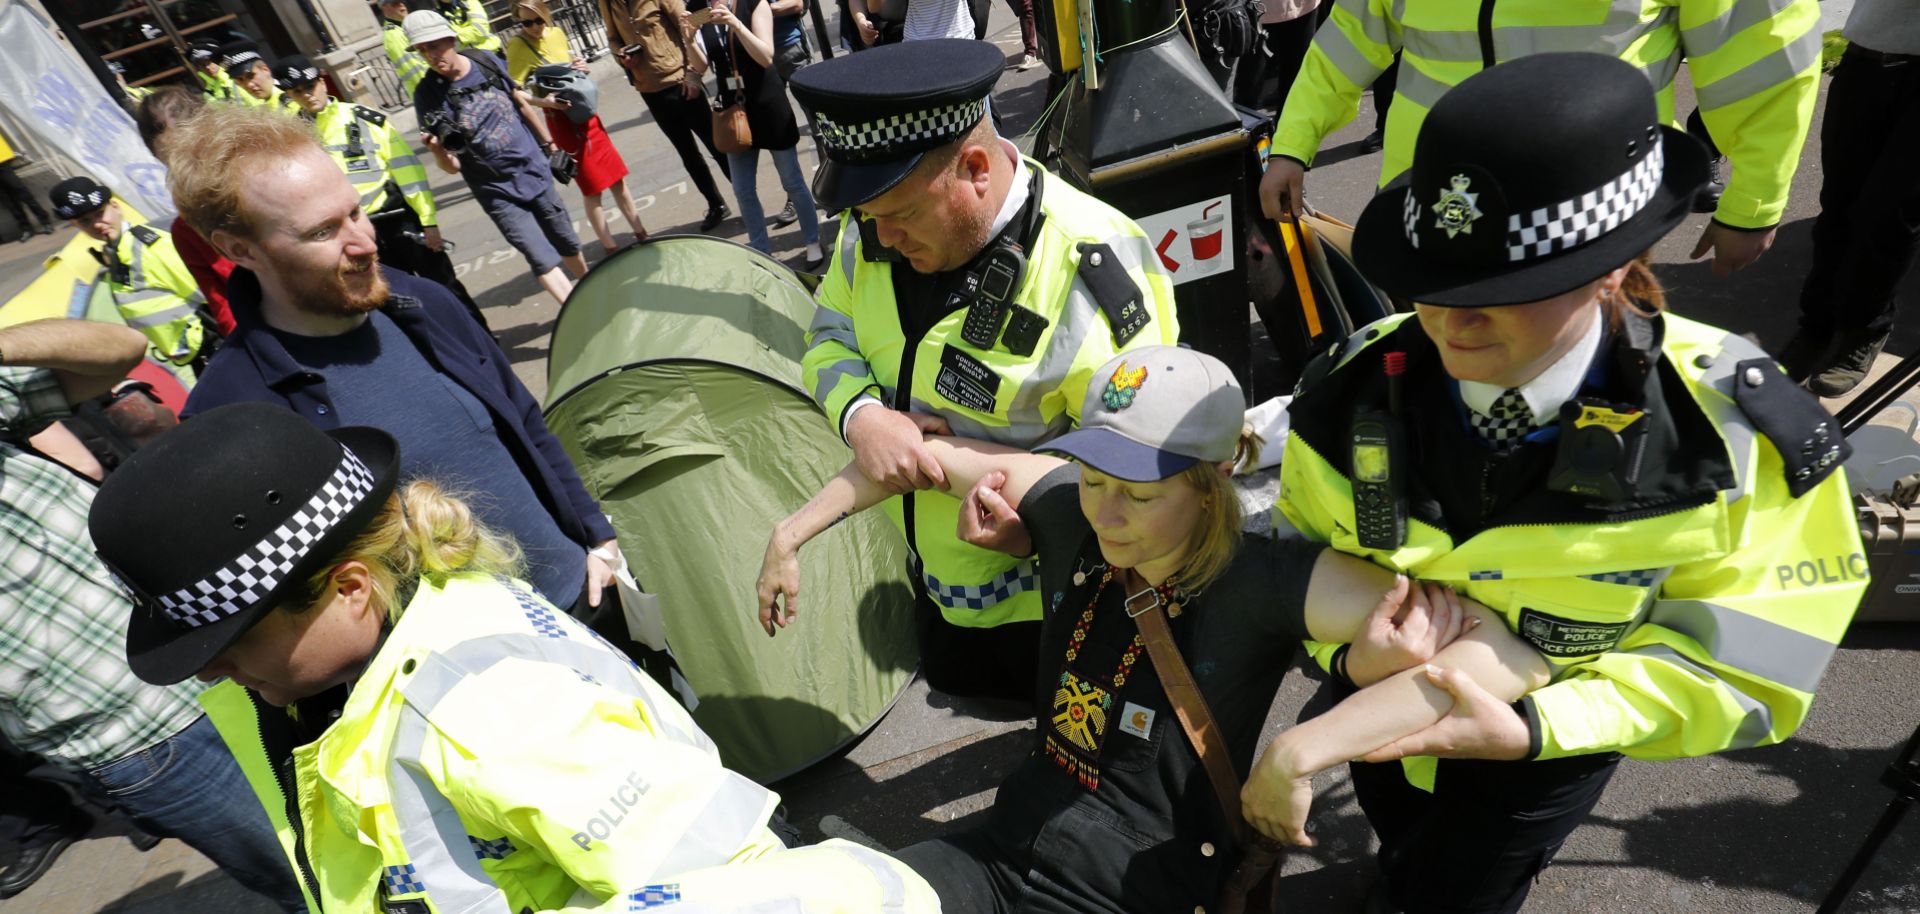 Police officers carry away an activist during an Extinction Rebellion protest in central London on April 19, 2019.